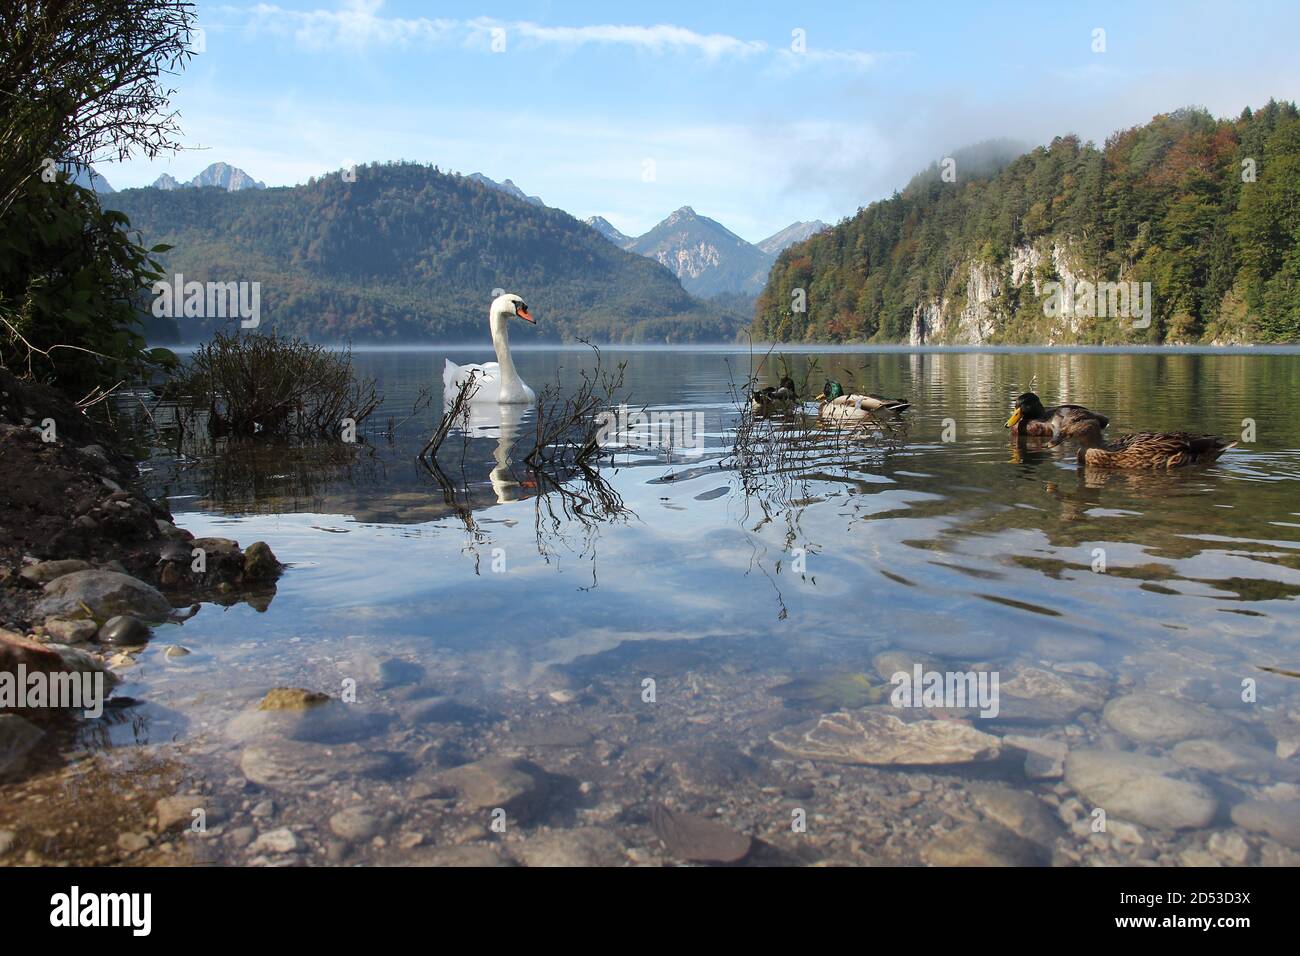 Mesmerizing shot of a swan and ducks swimming in Alpsee, a lake in Germany Stock Photo